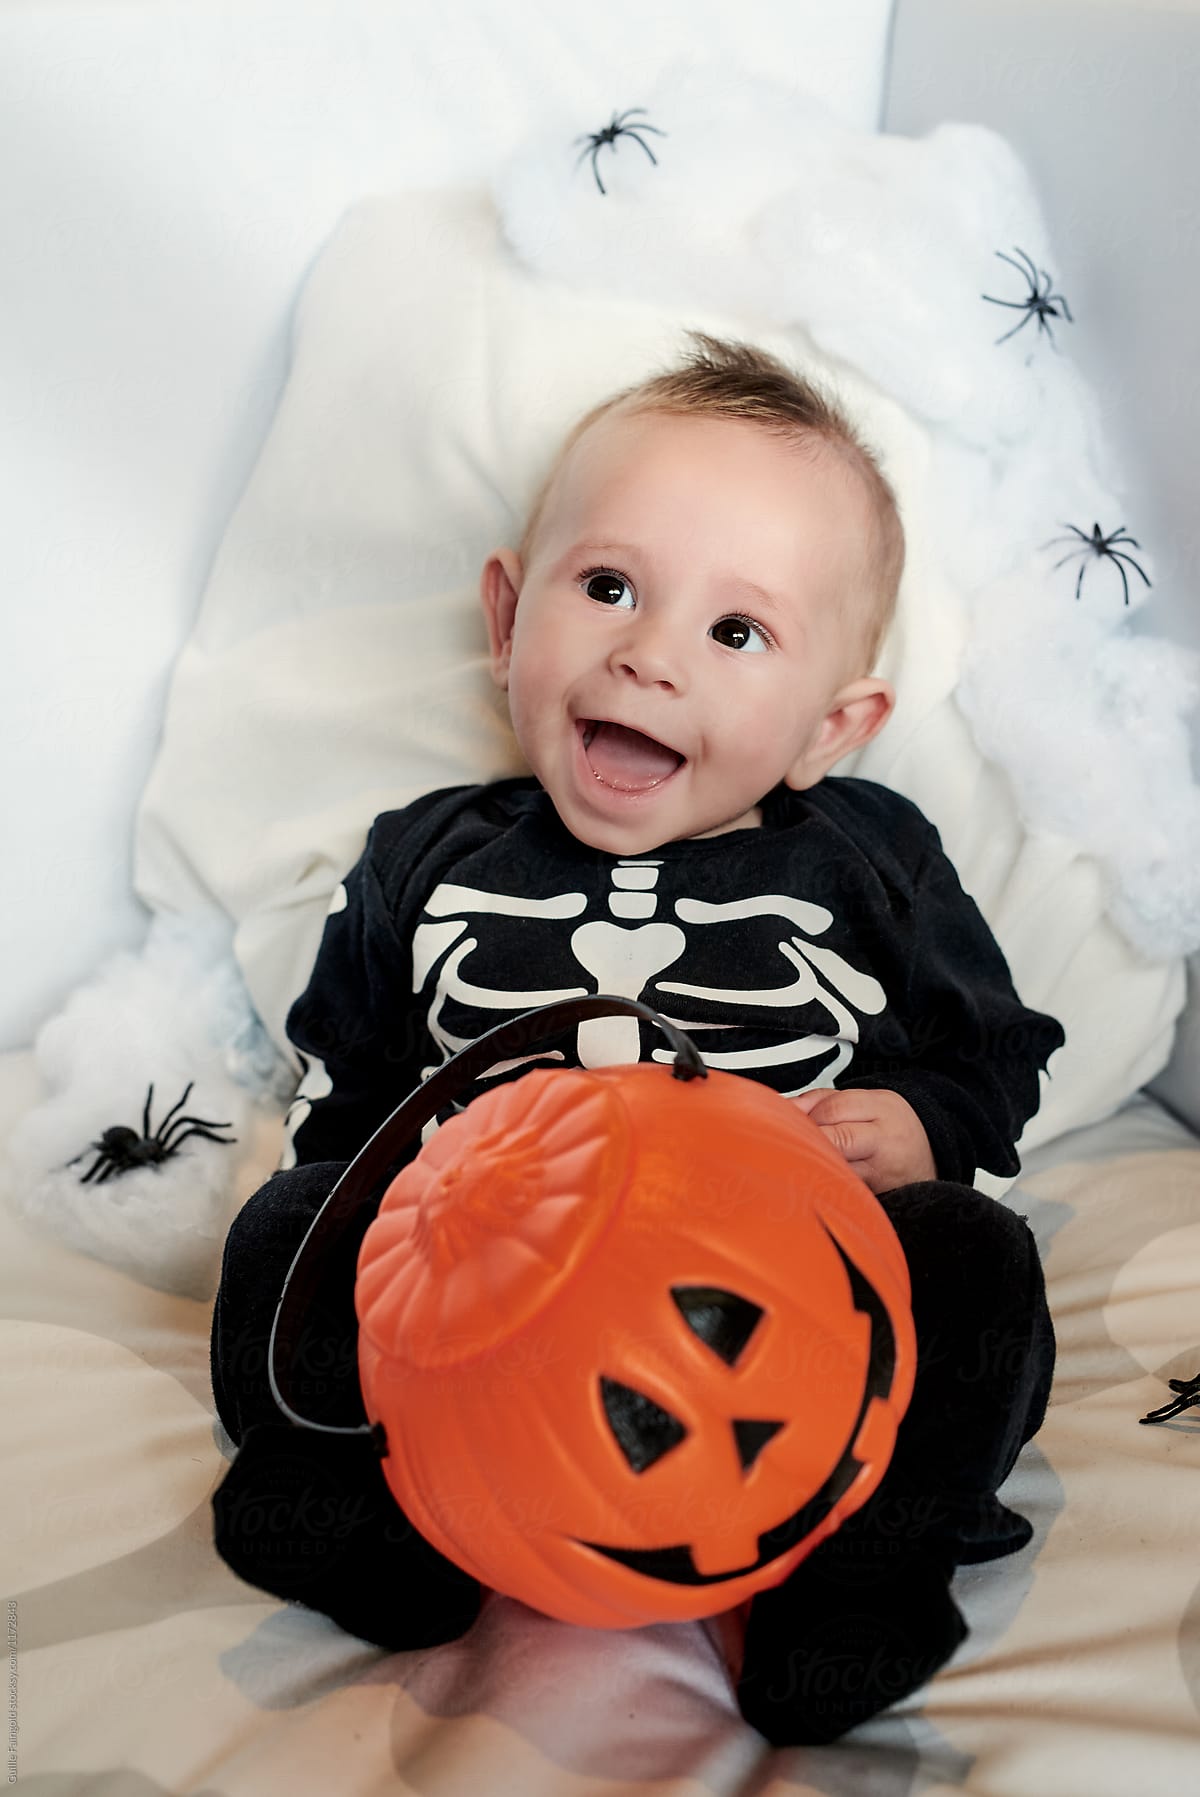 Excited baby with trick or treat bucket